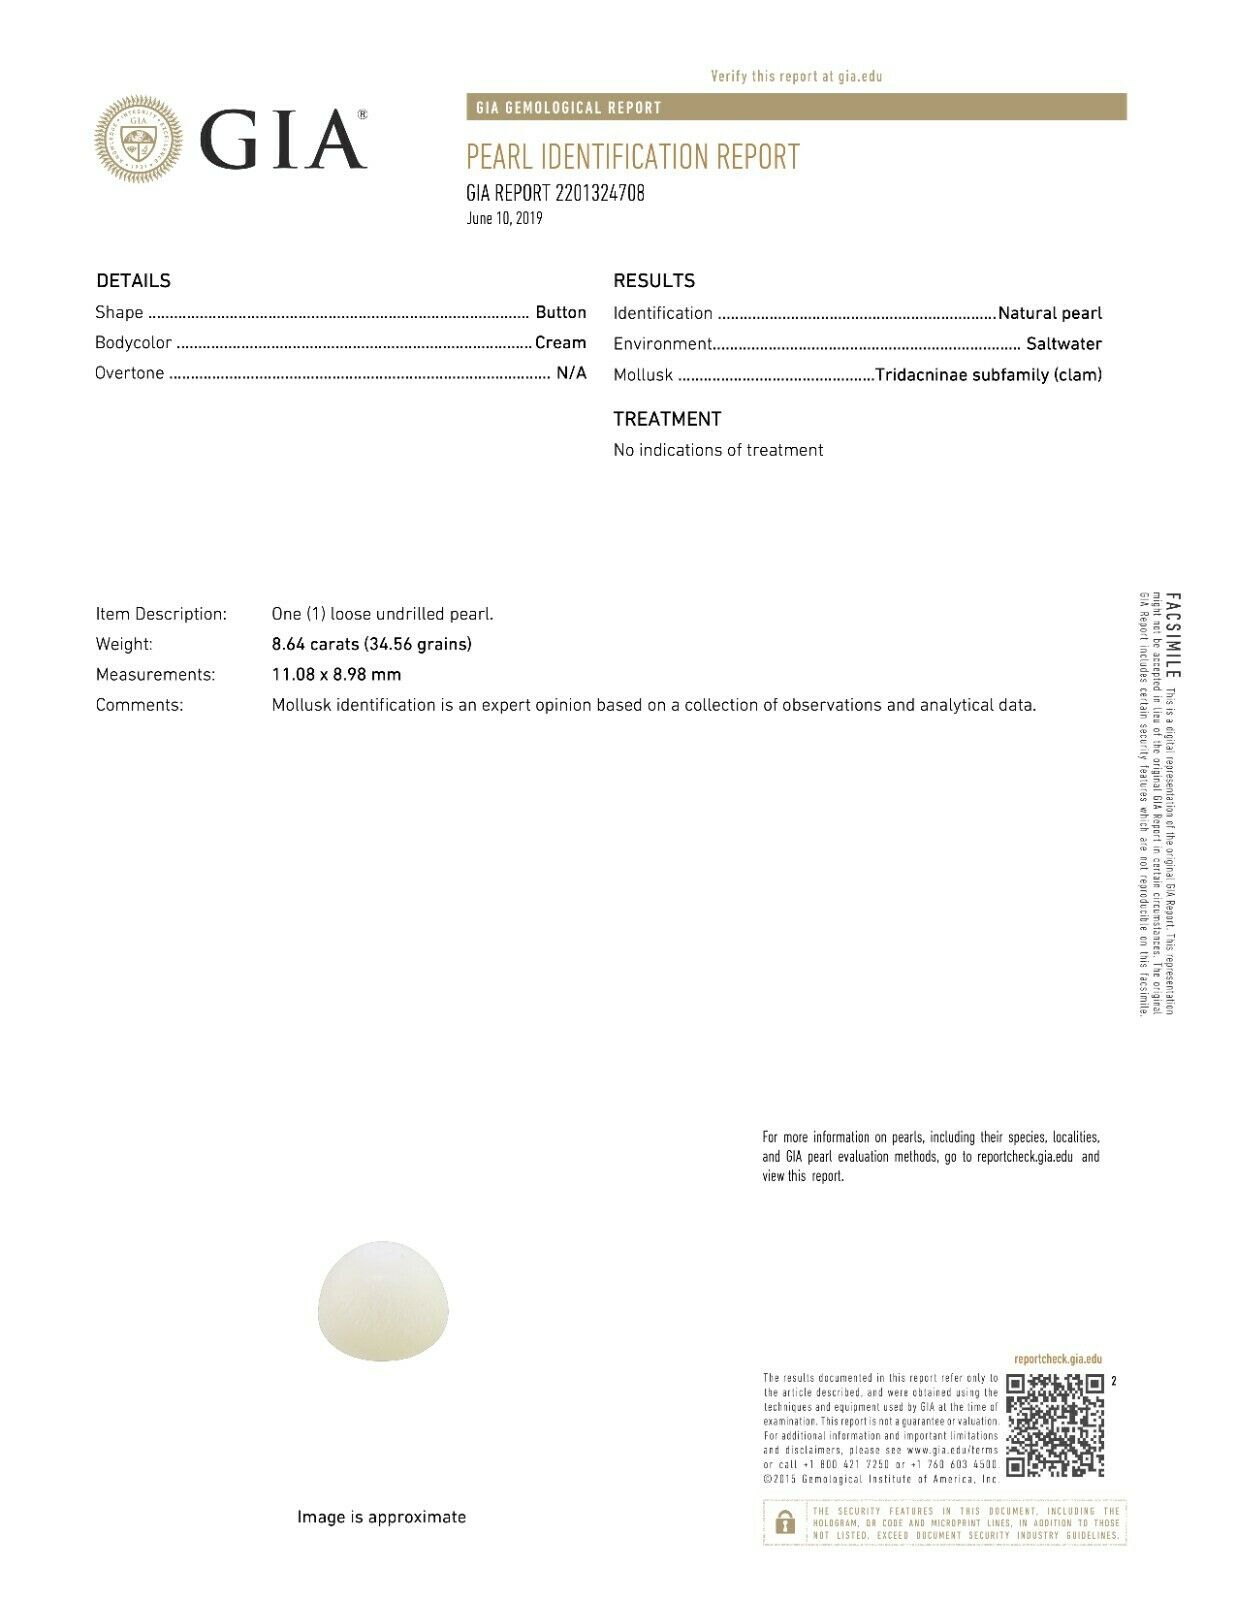 GIA Pearl Identification Report for an 8.64 ct. natural tridacna pearl